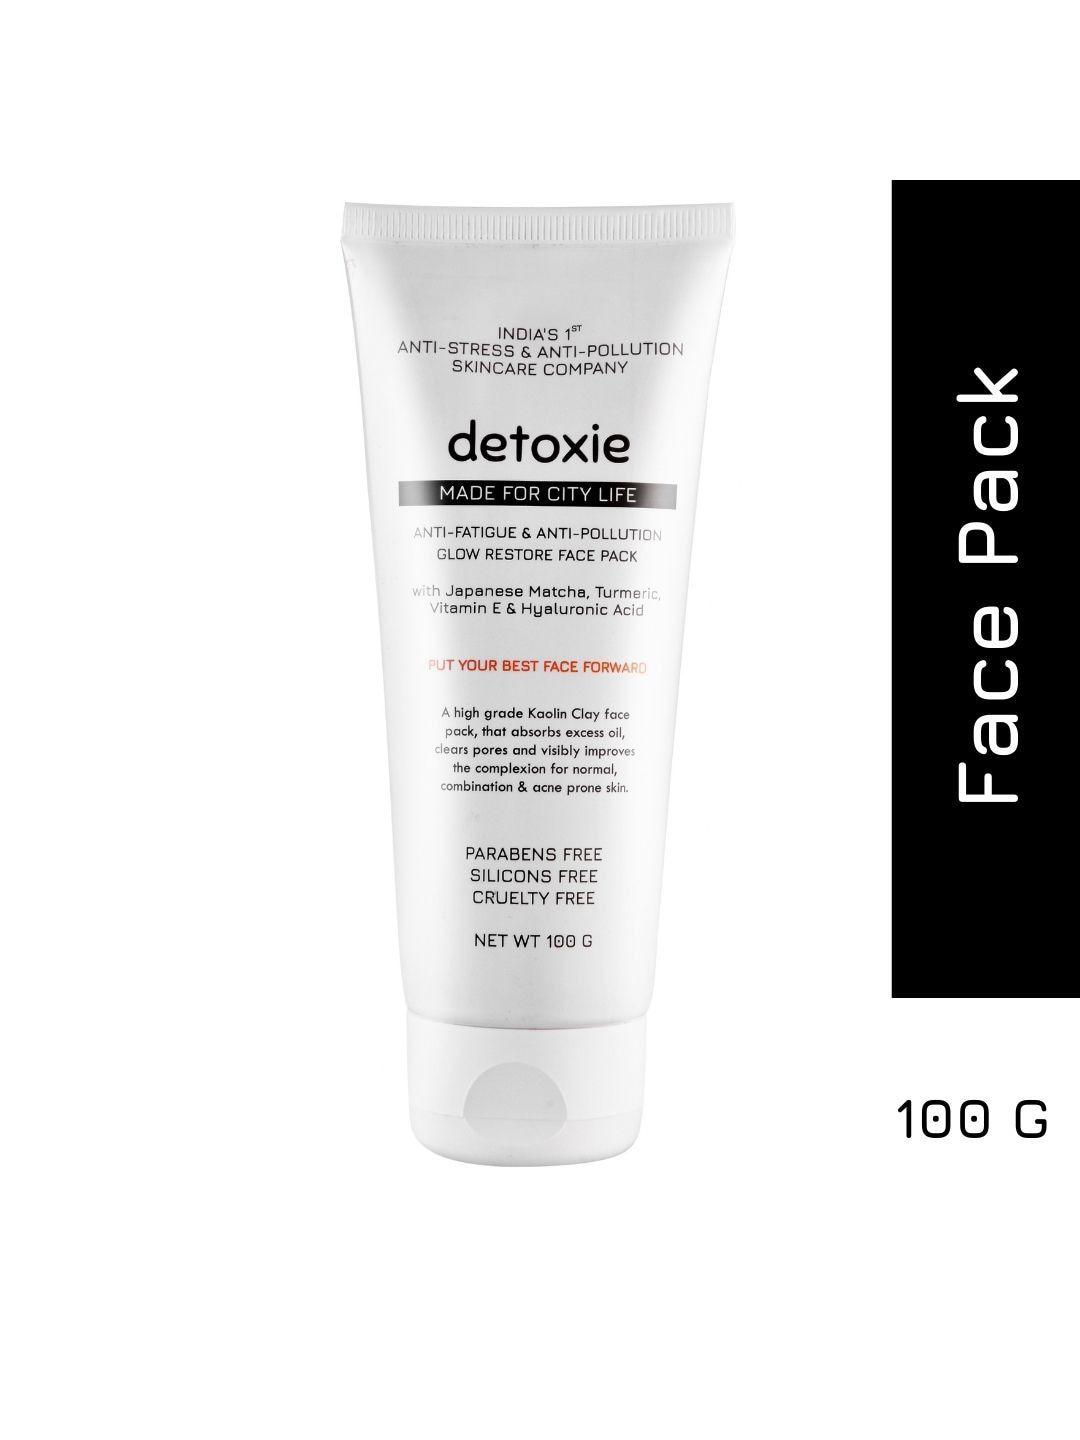 detoxie anti-fatigue & anti-pollution glow restore face pack with turmeric - 100 g